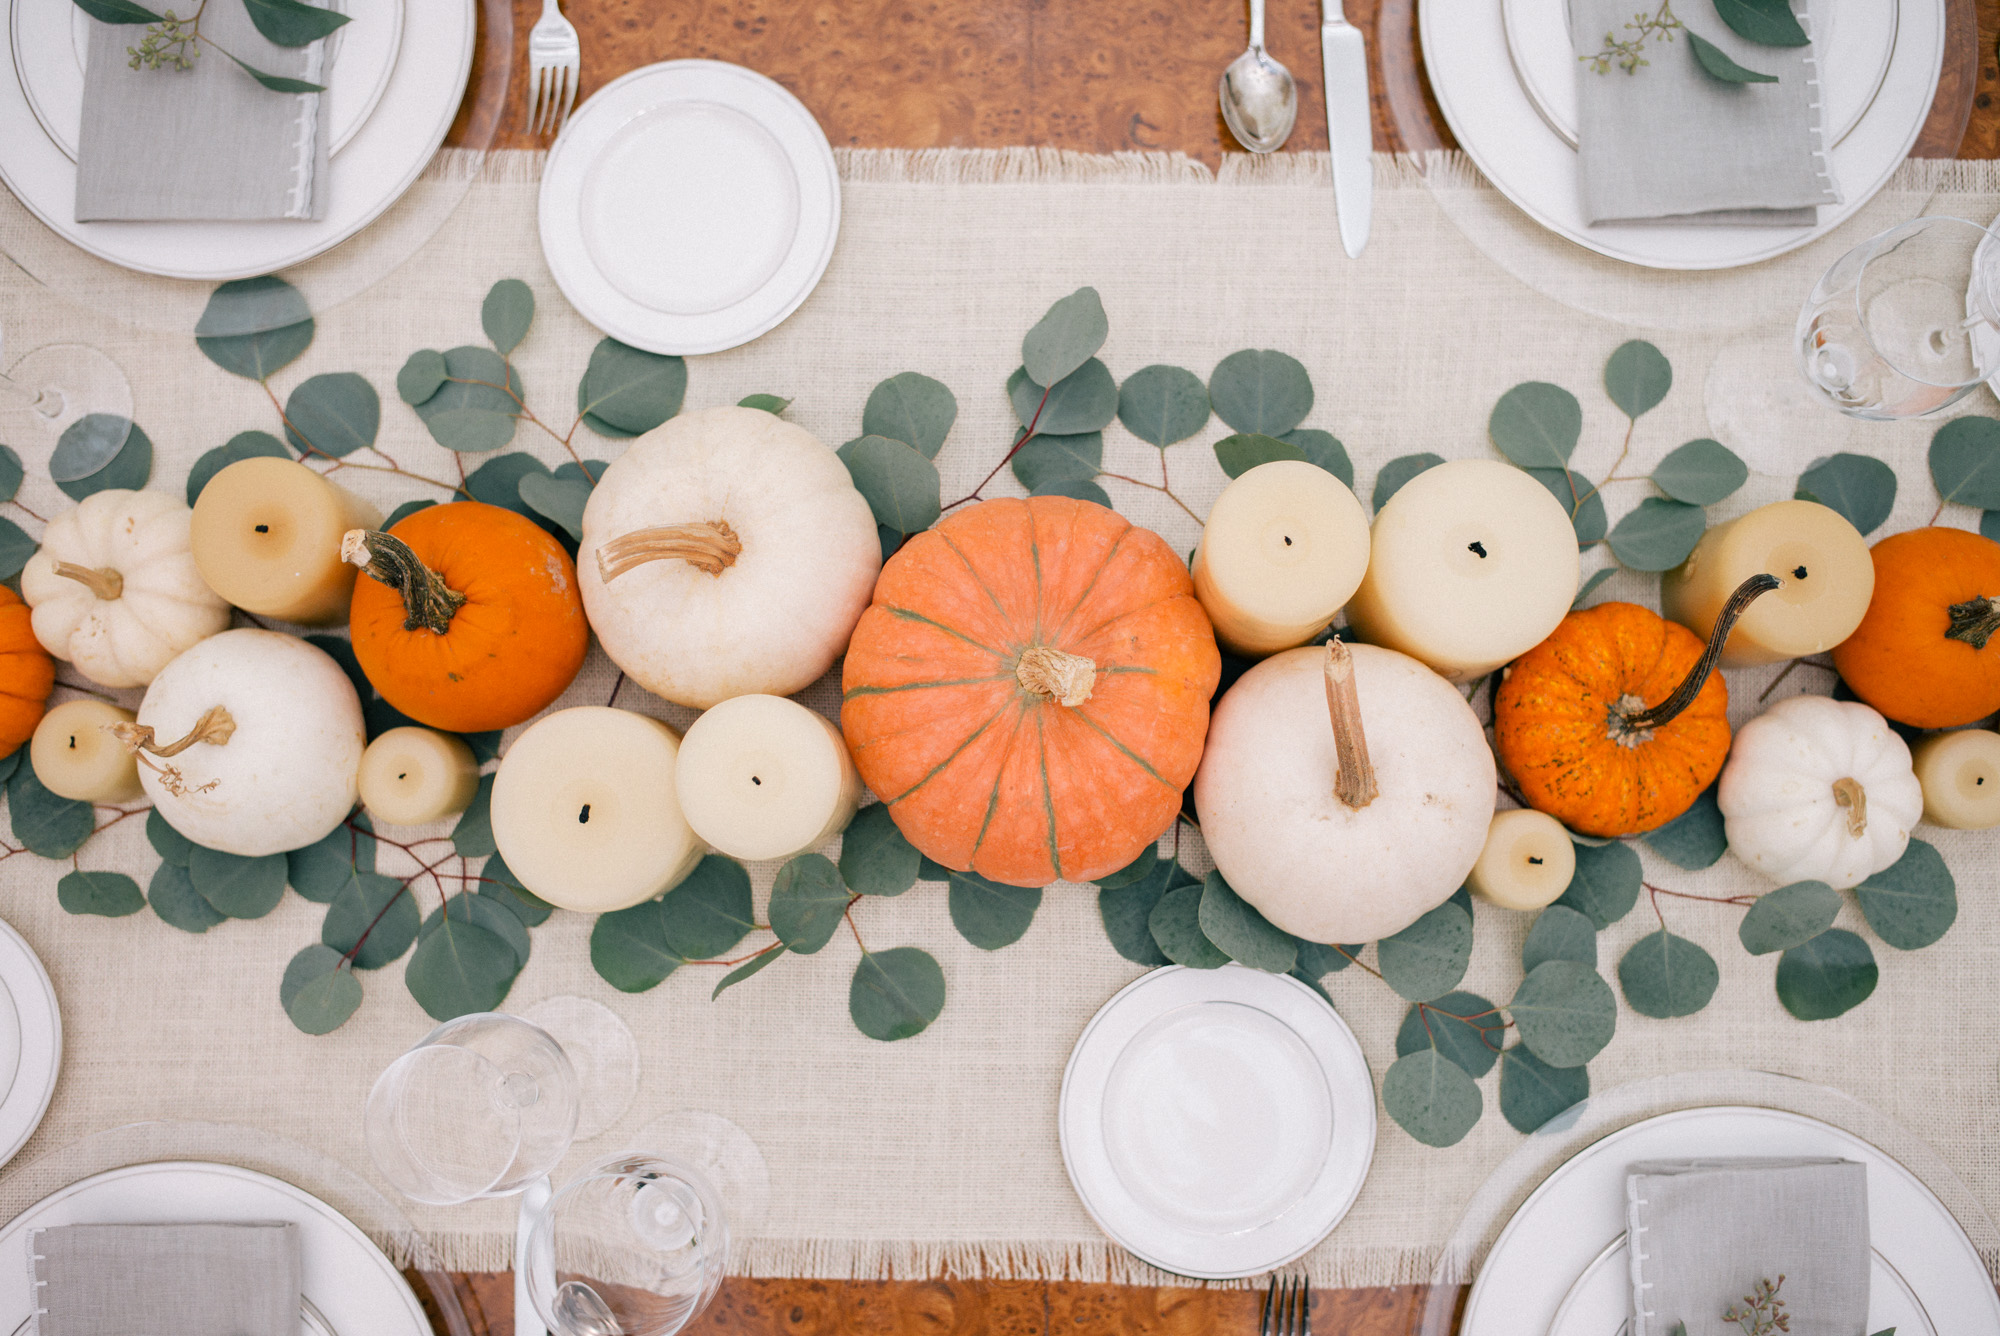 gmg-thanksgiving-table-1003543-2